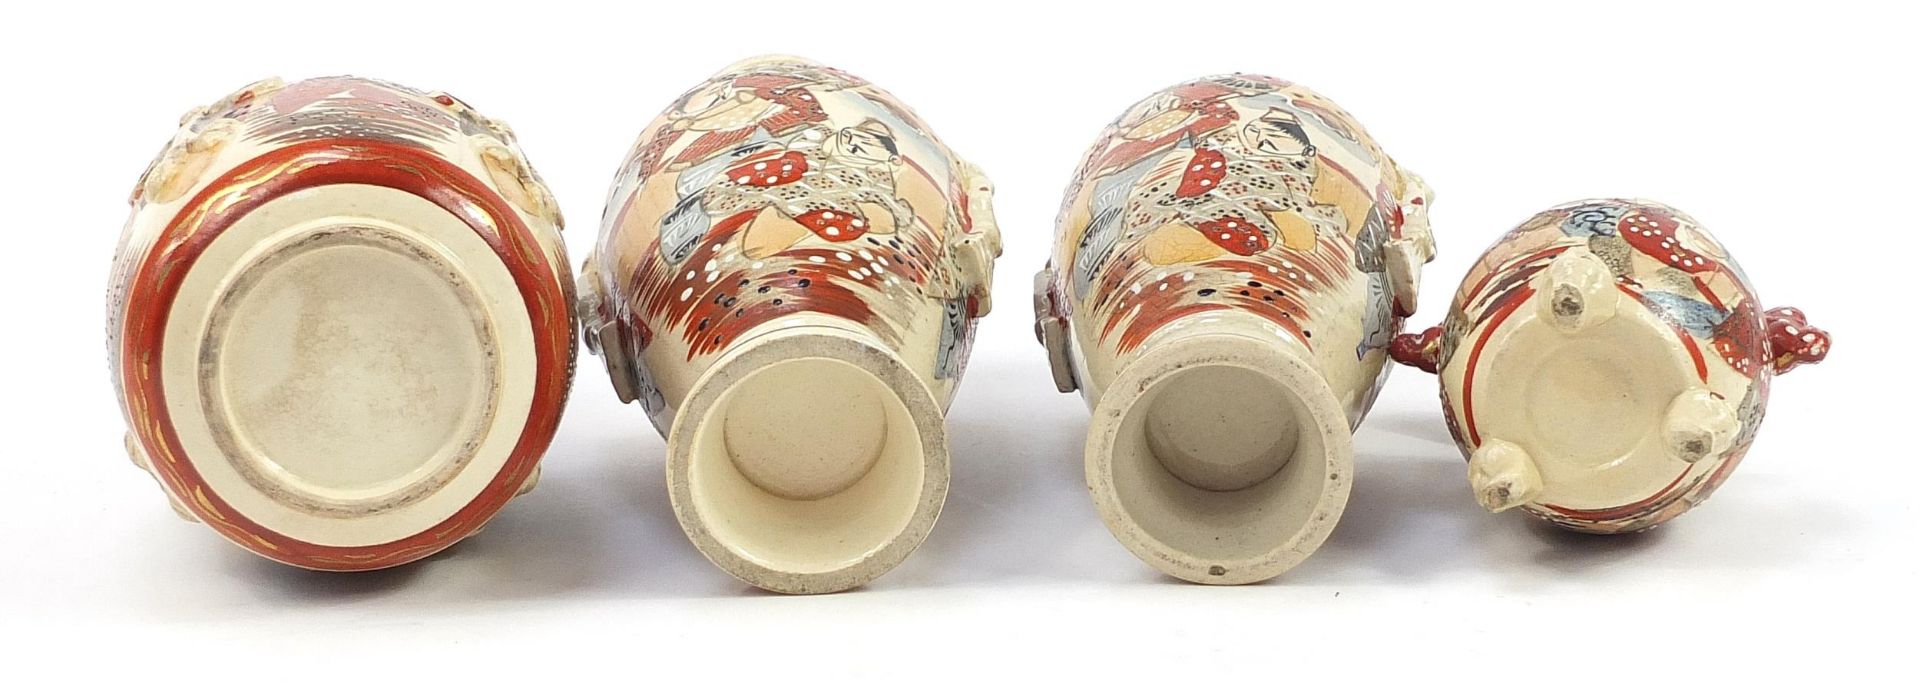 Japanese Satsuma pottery including a pair of vases and koro with cover, the largest 24.5cm high - Bild 3 aus 3